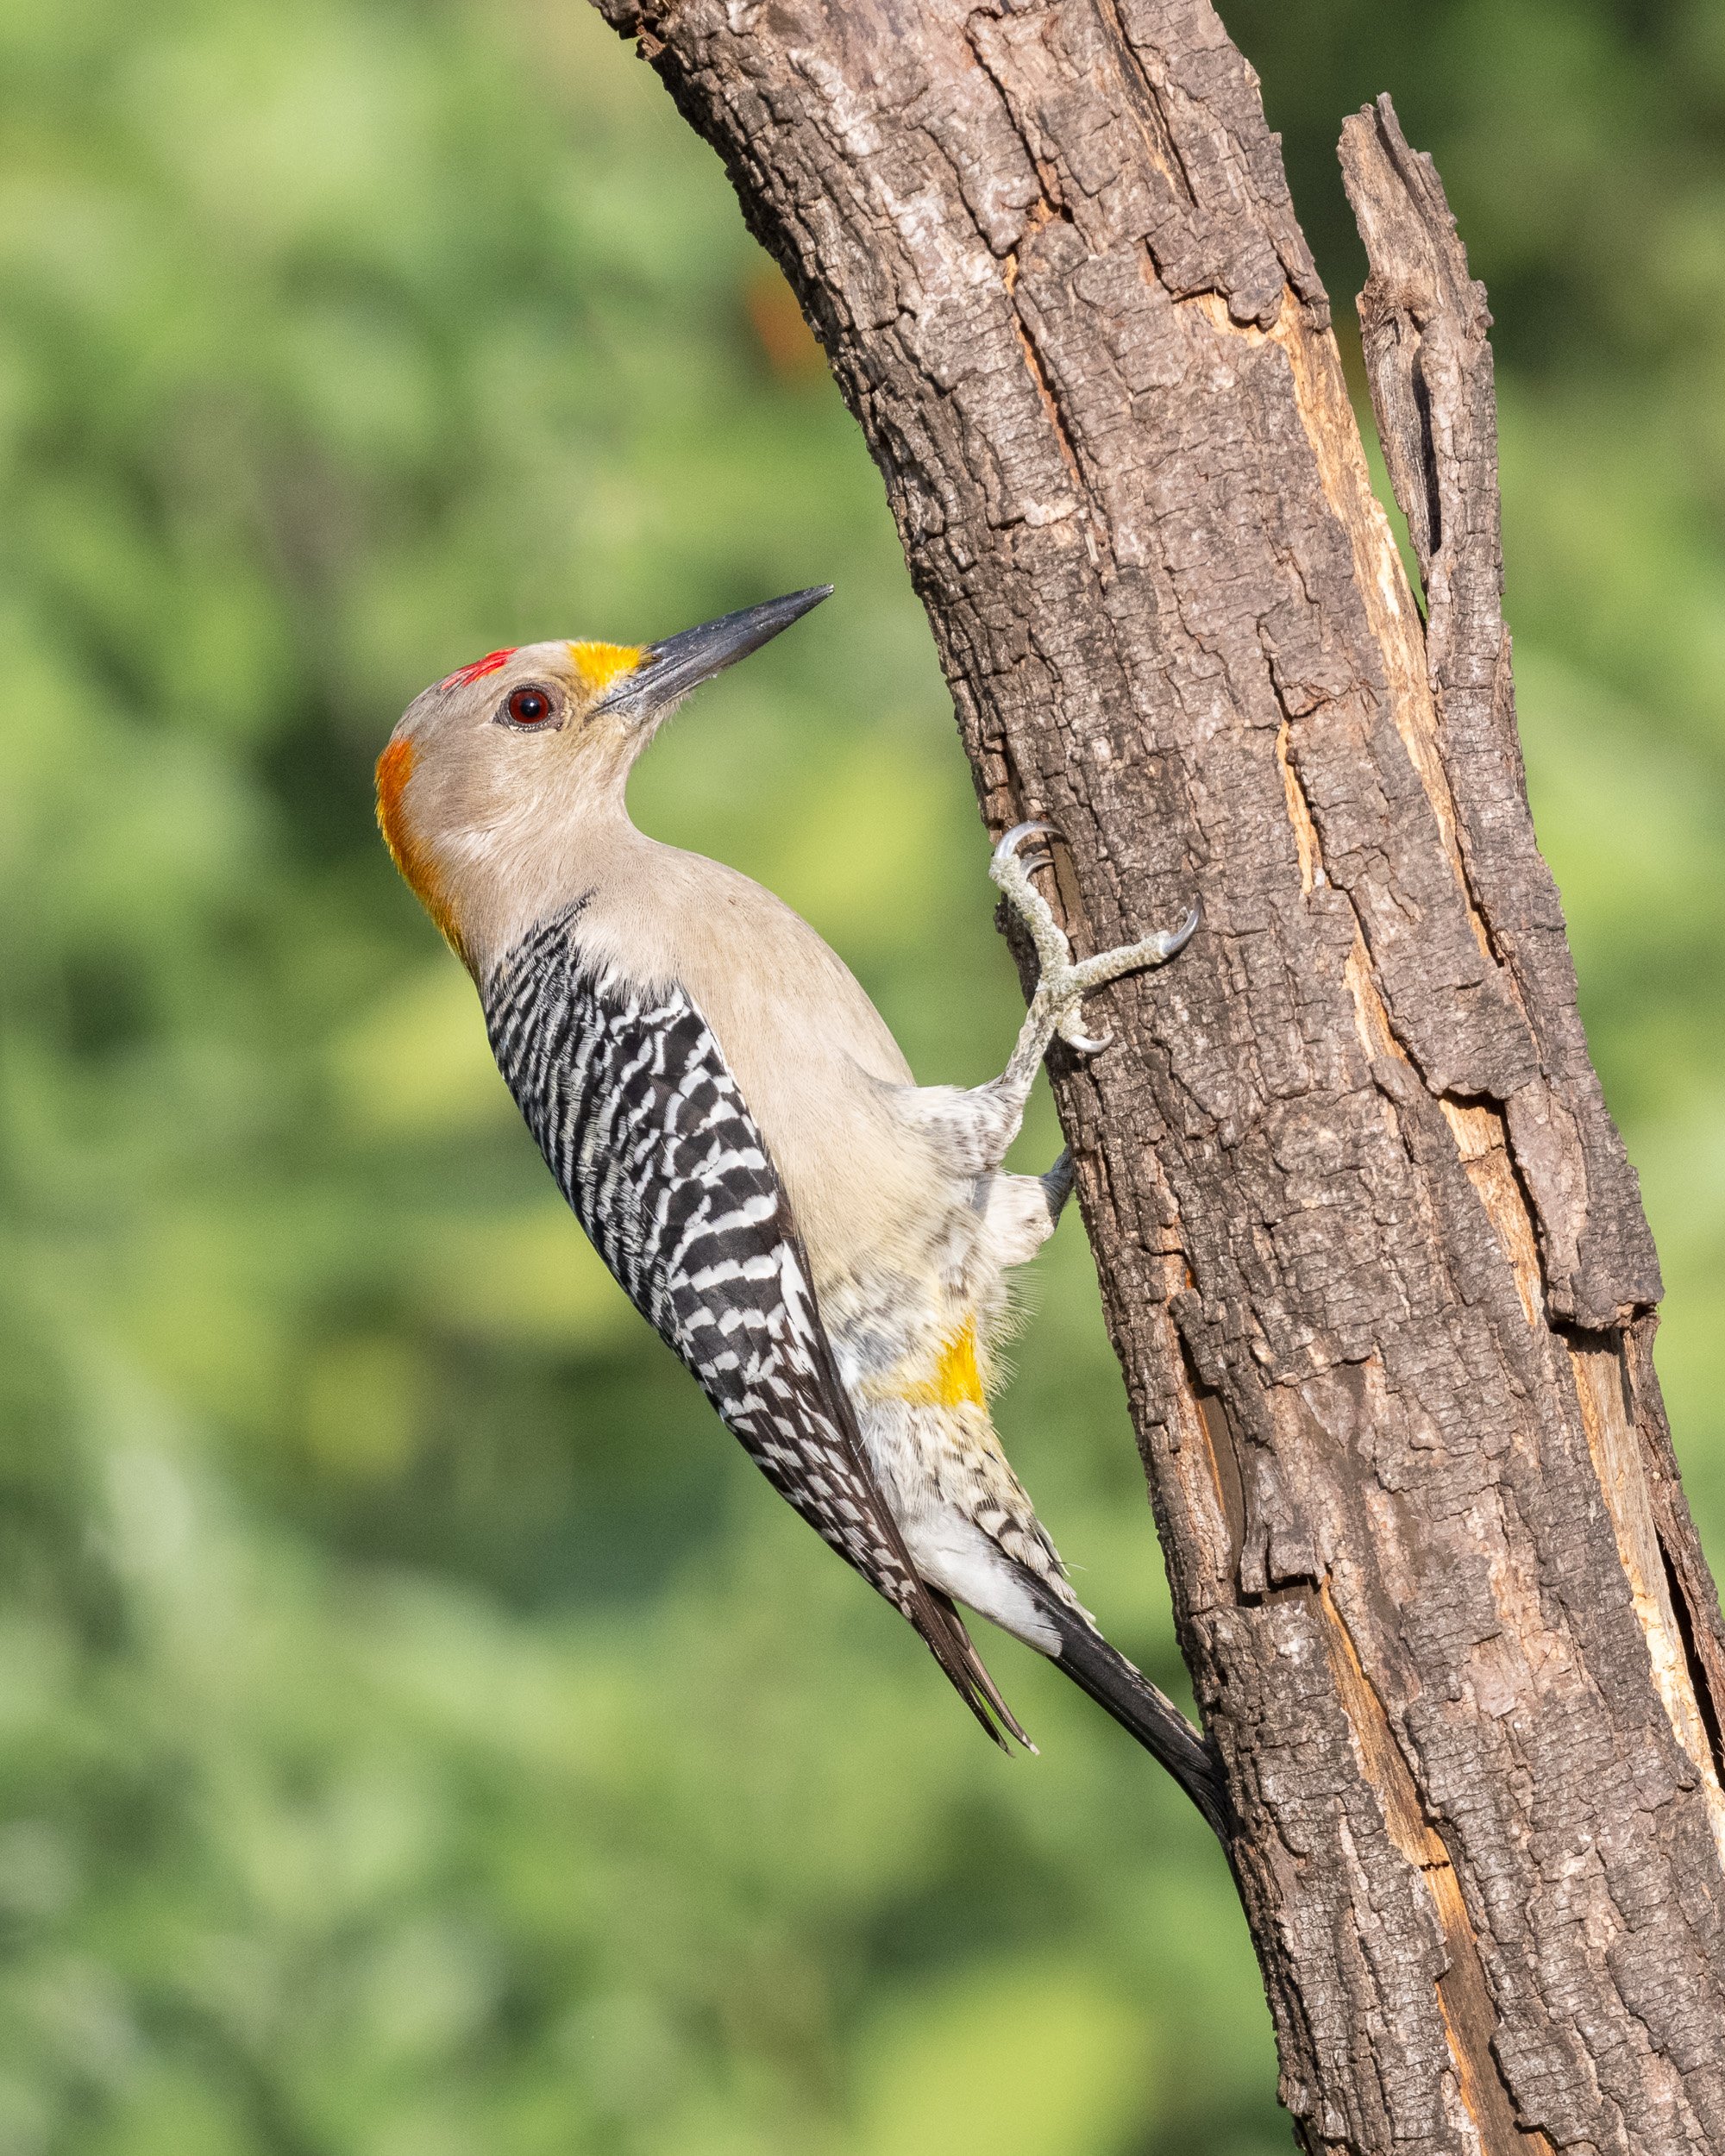  Quite similar to our red-bellied woodpecker, these golden-fronted woodpeckers (life bird) are one of only two woodpecker species  commonly found in South Texas, the other being the ladder-backed. In the midwest, we have six woodpecker species in the